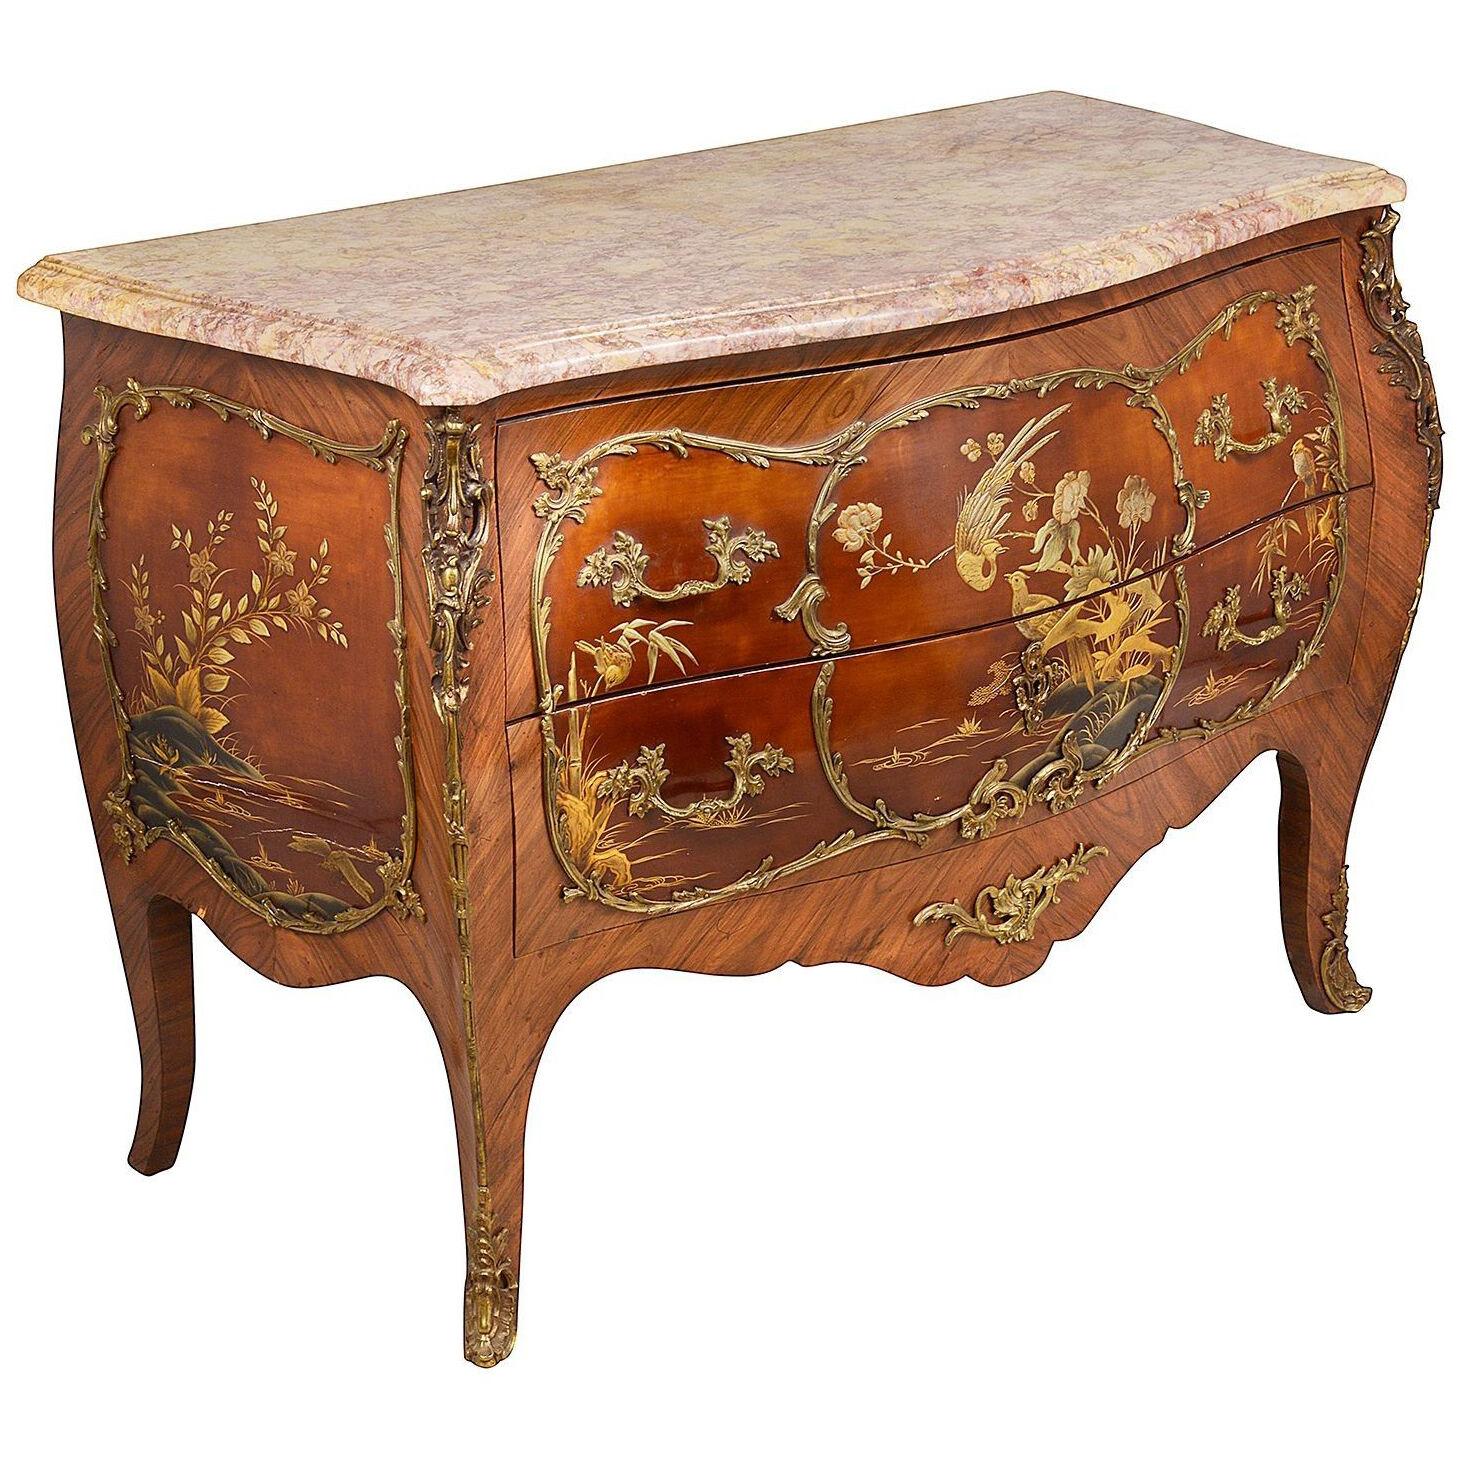 French Chinoiserie lacquer commode, circa 1900